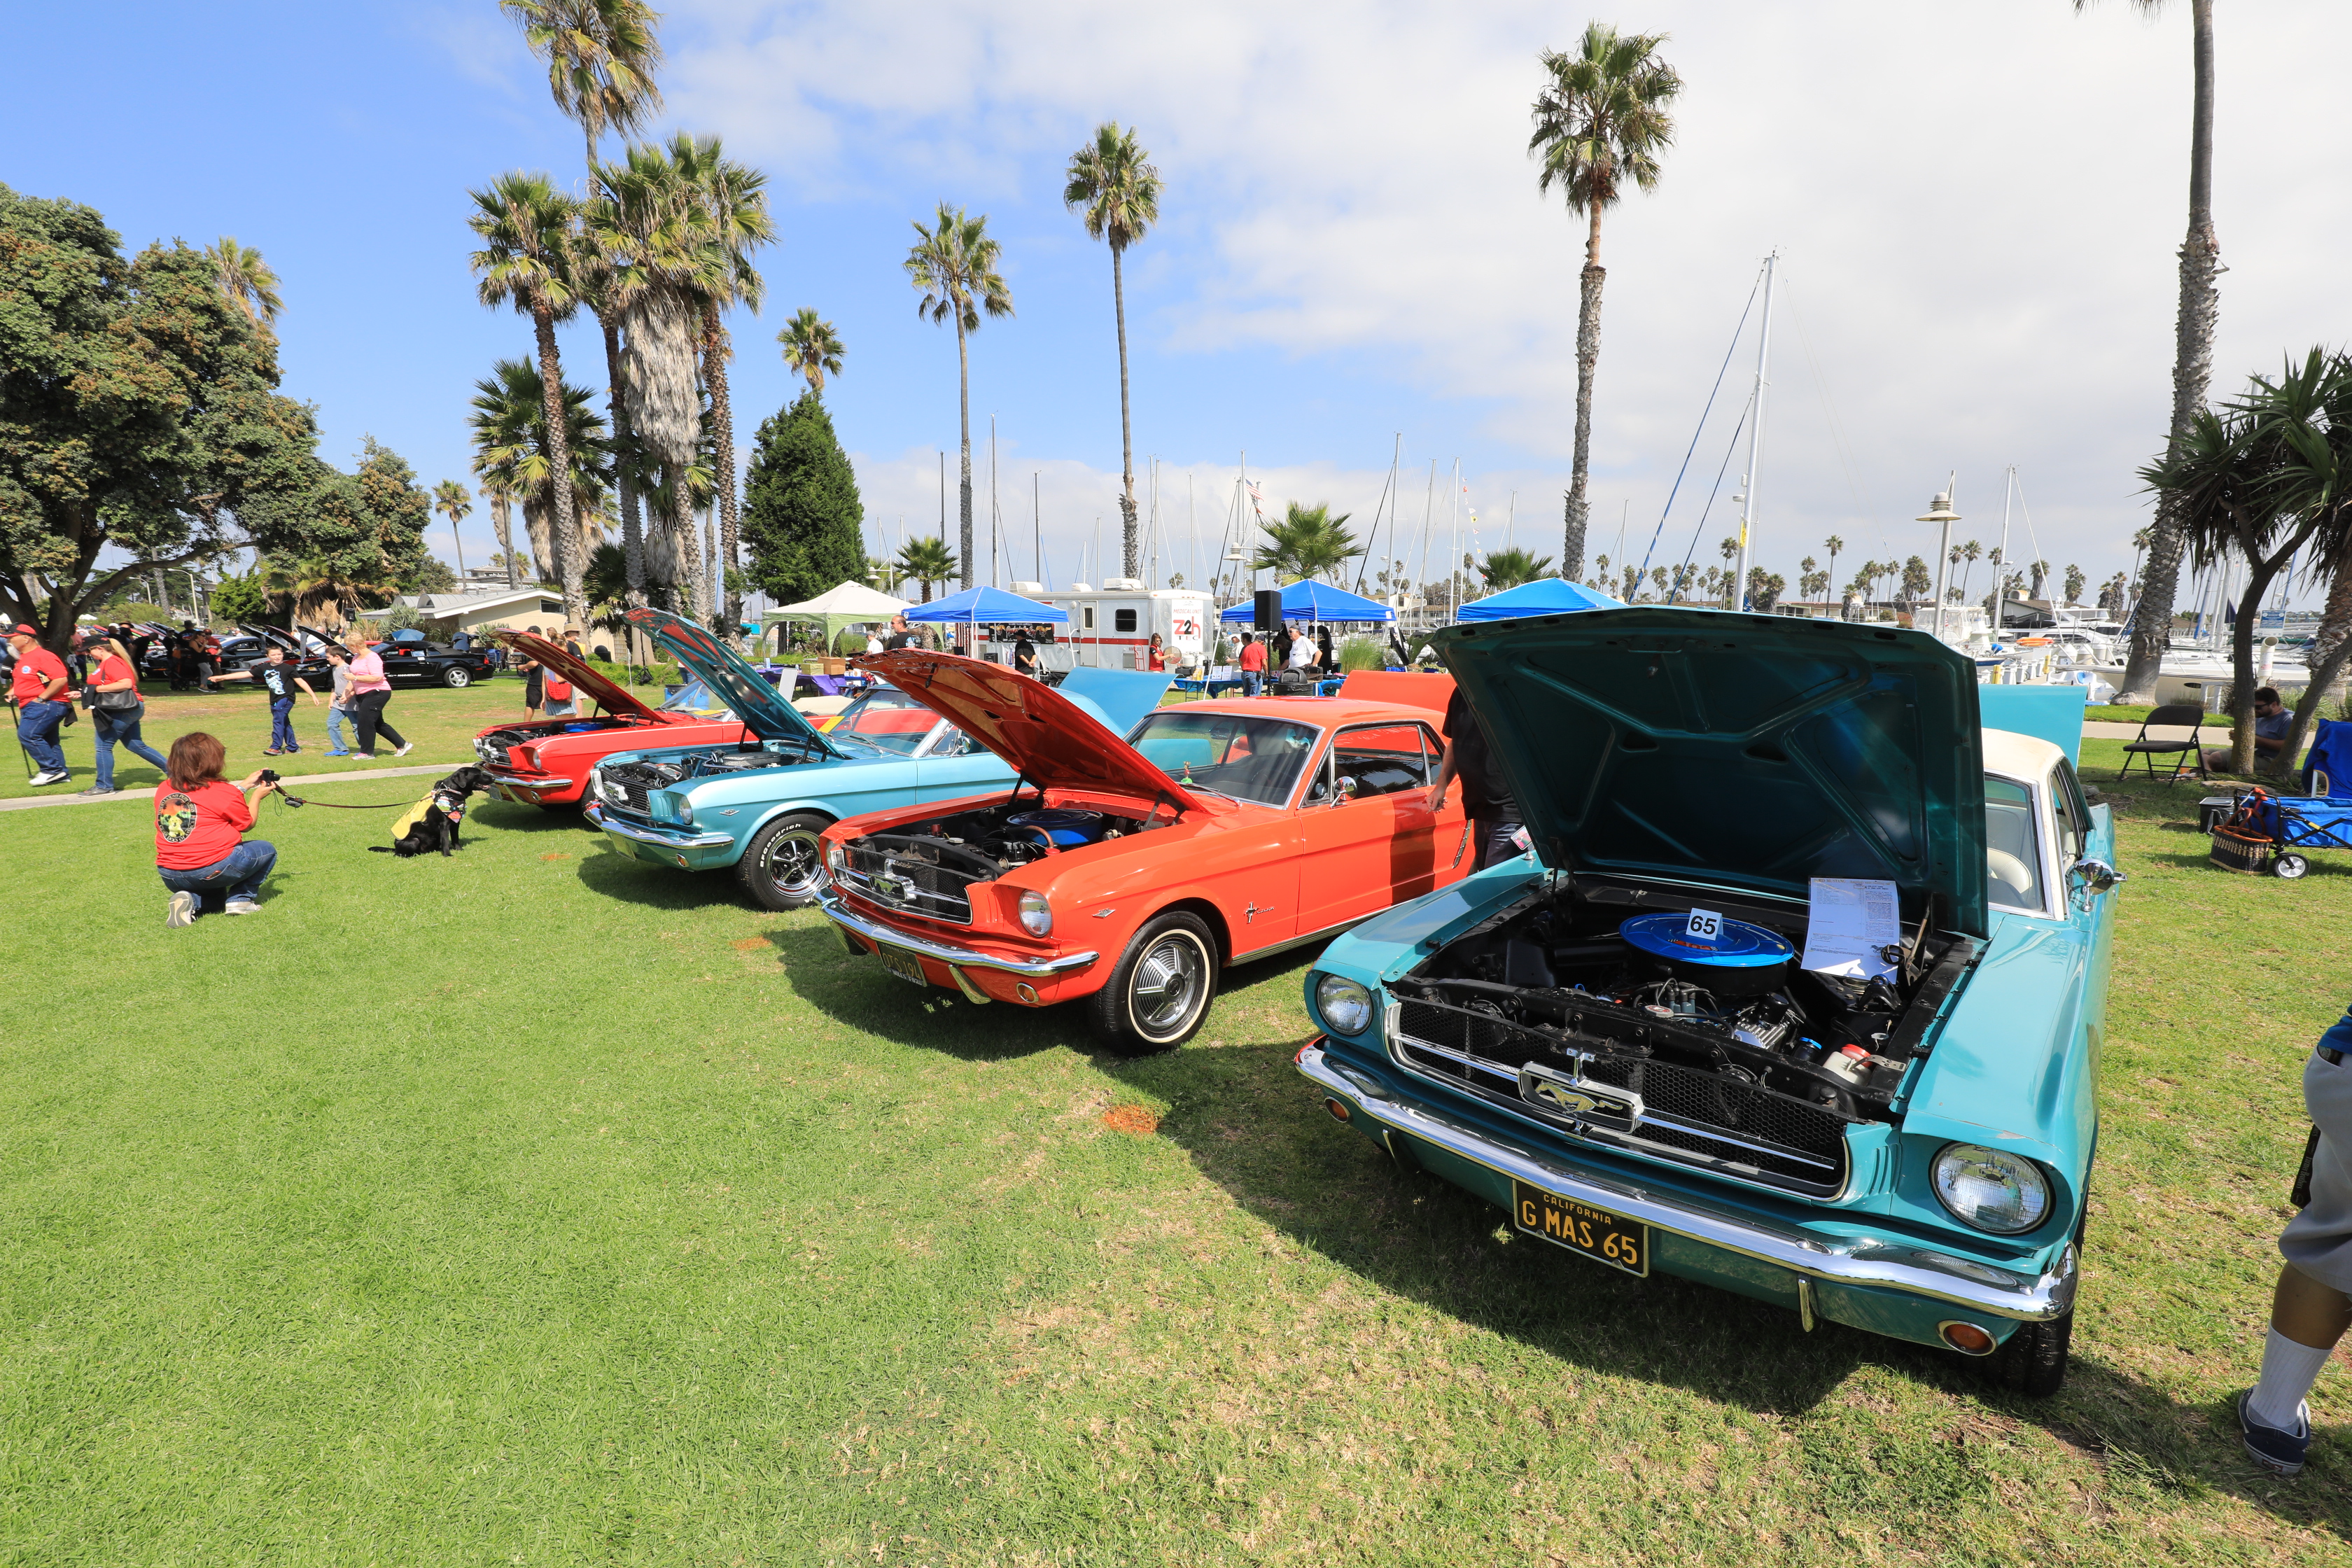 4 Ford Mustangs, alternating red and blue, with their hoods up (shiny and clean)